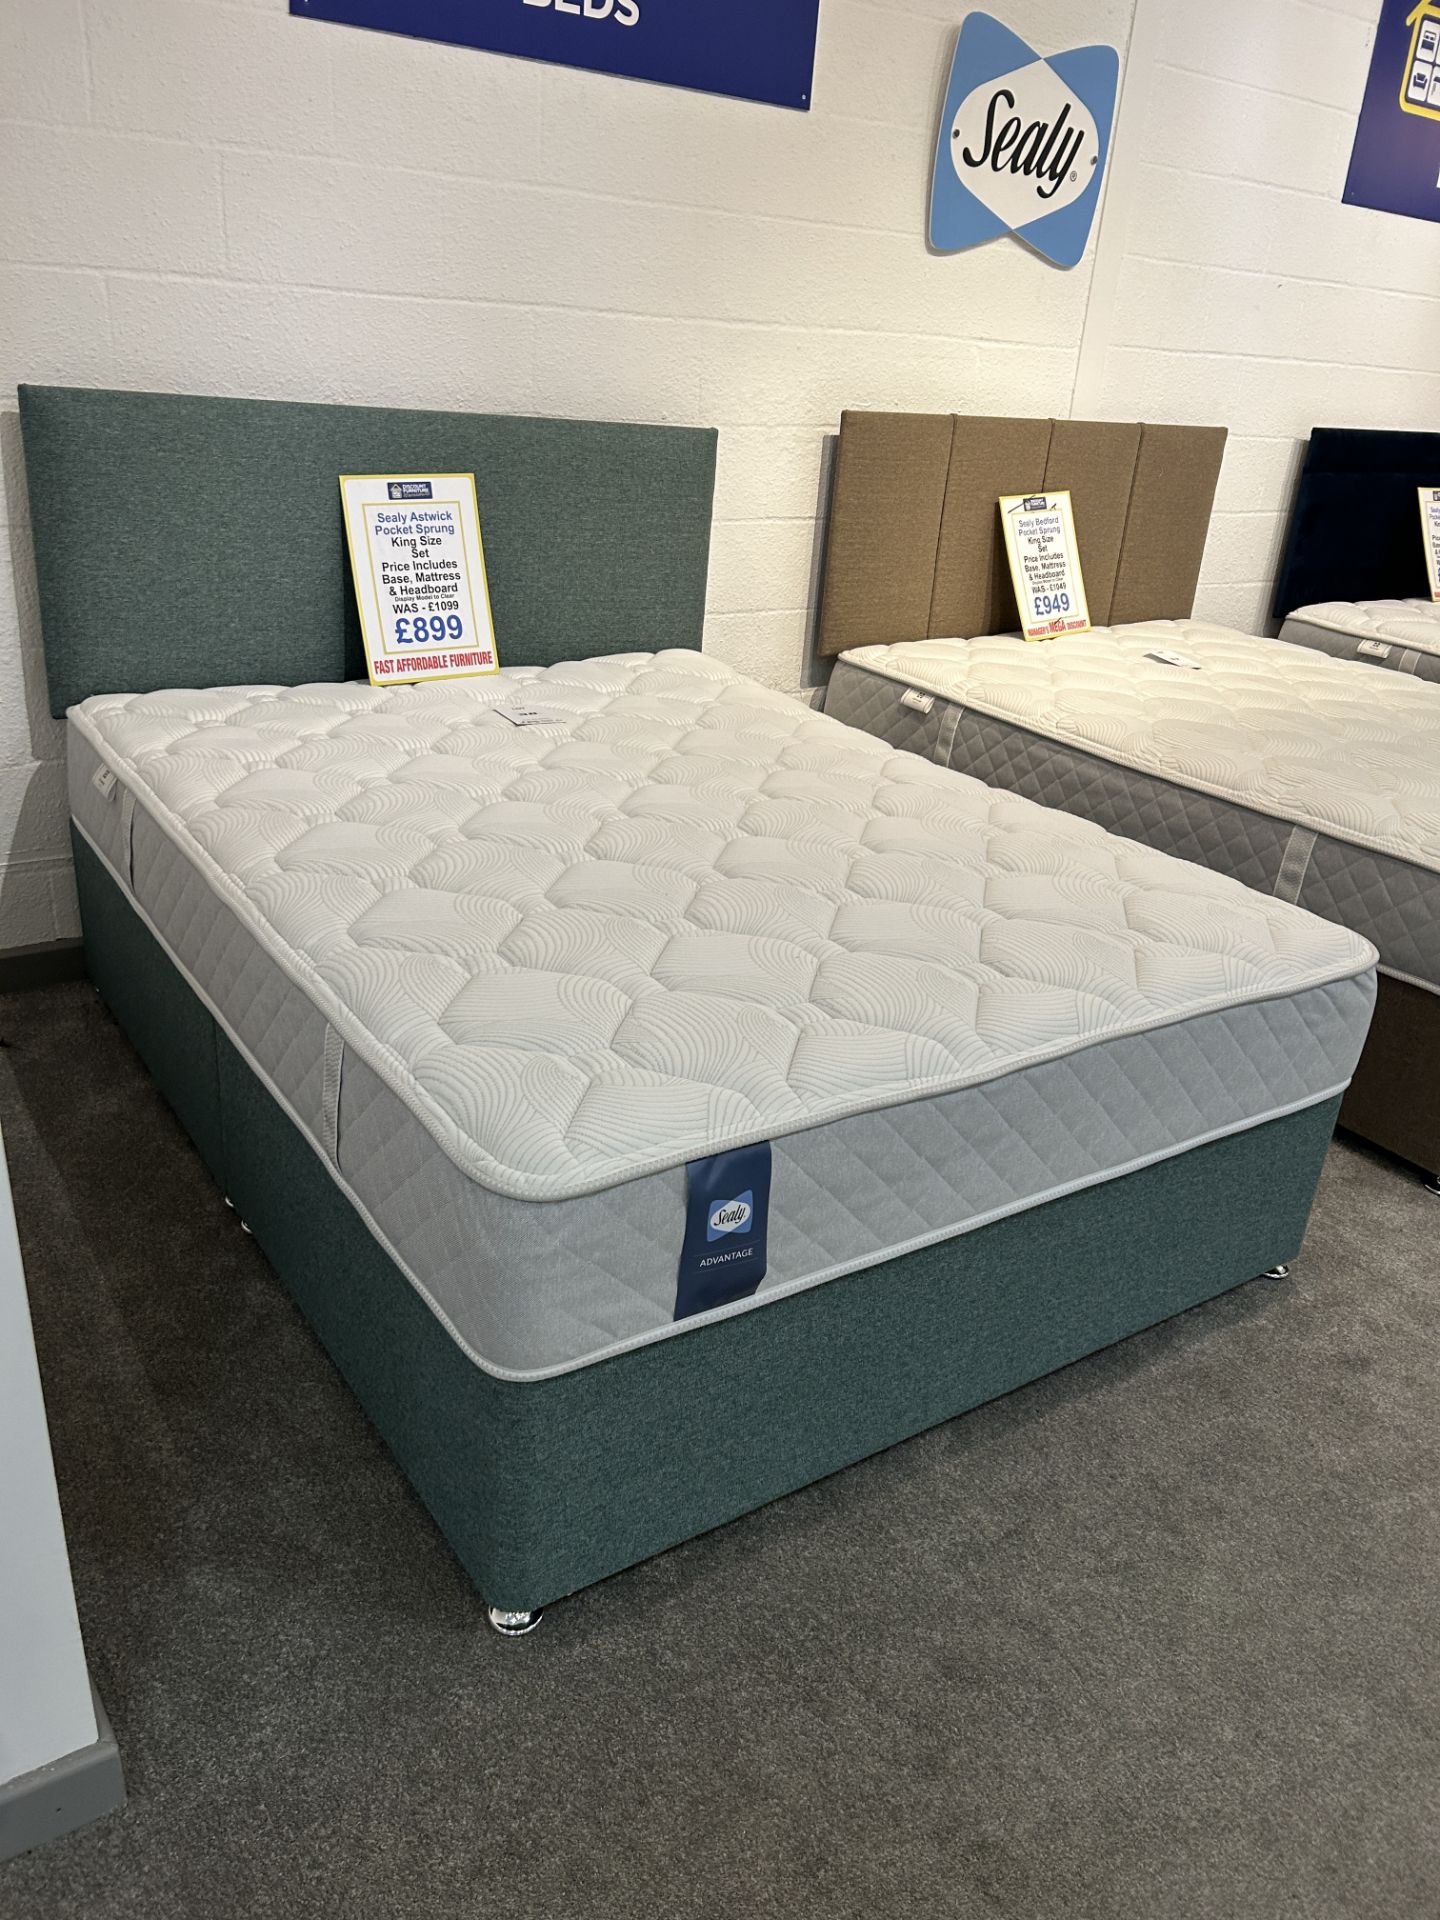 Ex-Display King Size Bed Set incl: Sealy Astwick Mattress, Base & Headboard | RRP £1,099 - Image 3 of 4